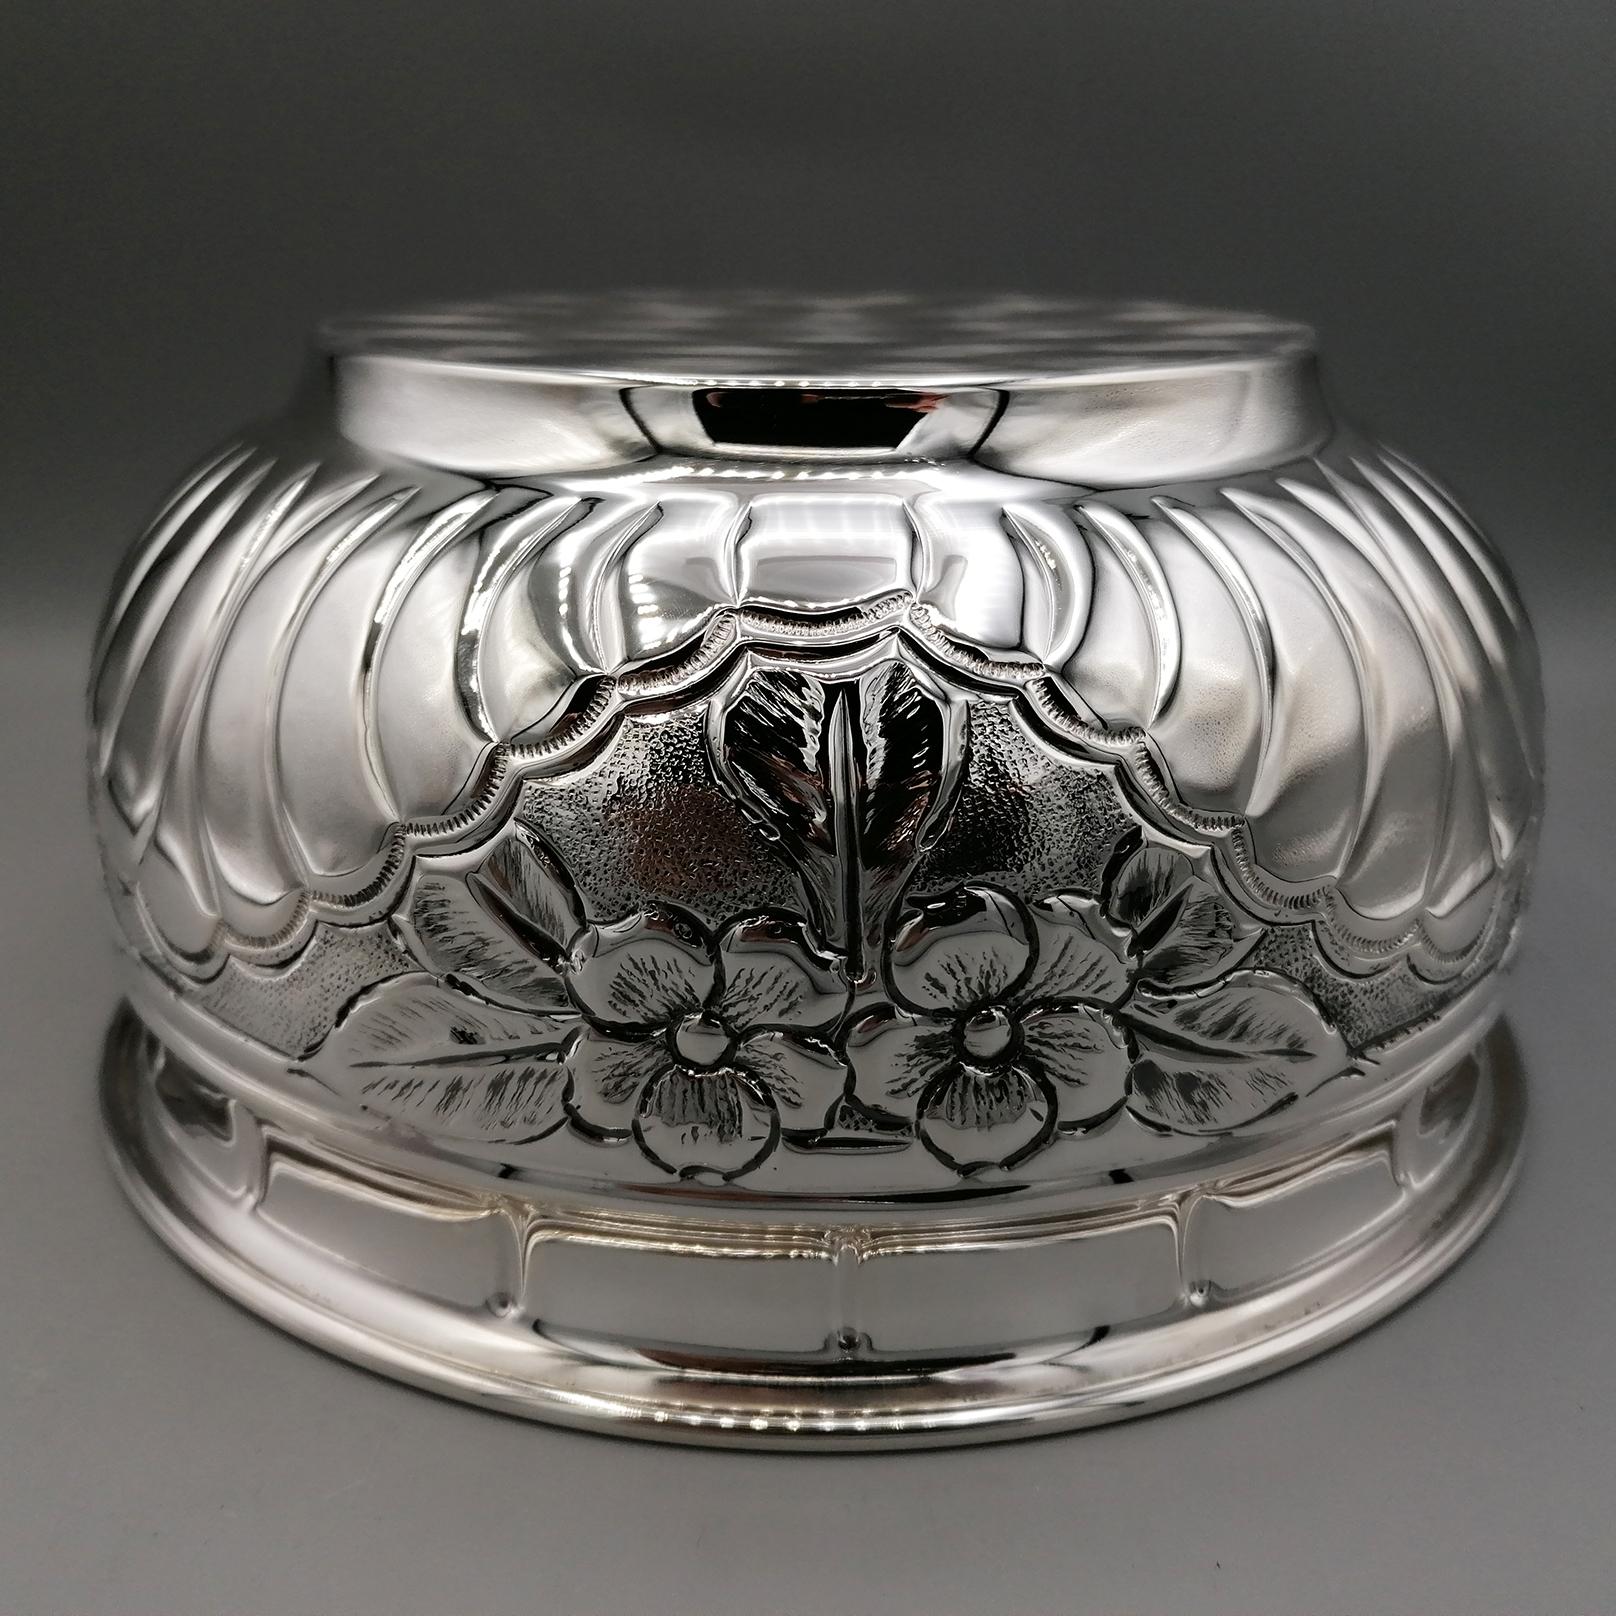 21st Century Italia Solid Silver 800 Decorated Bowl For Sale 3